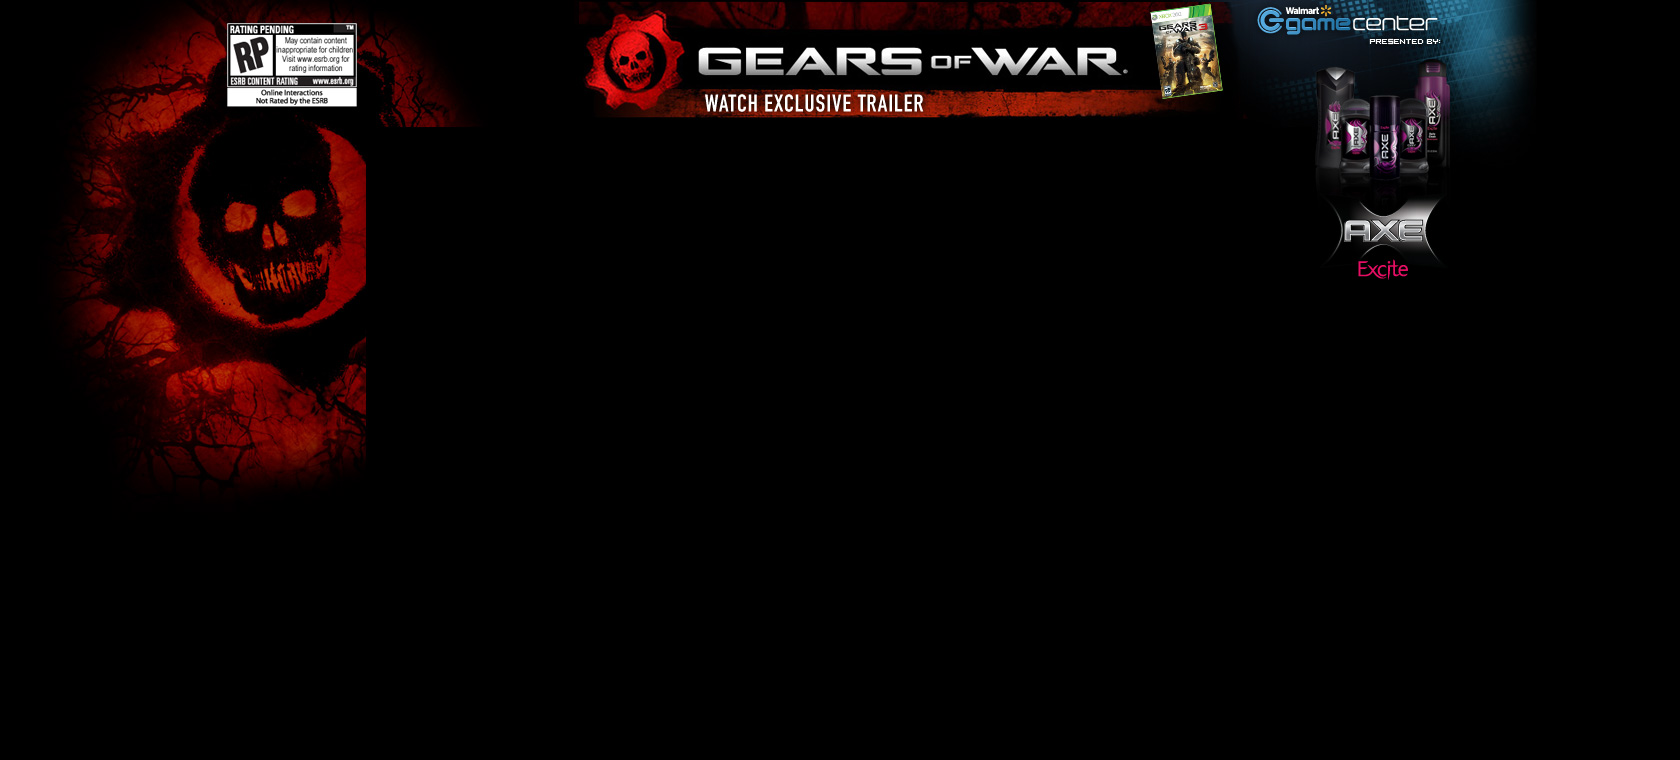 Gears Of War Background Image For EBW